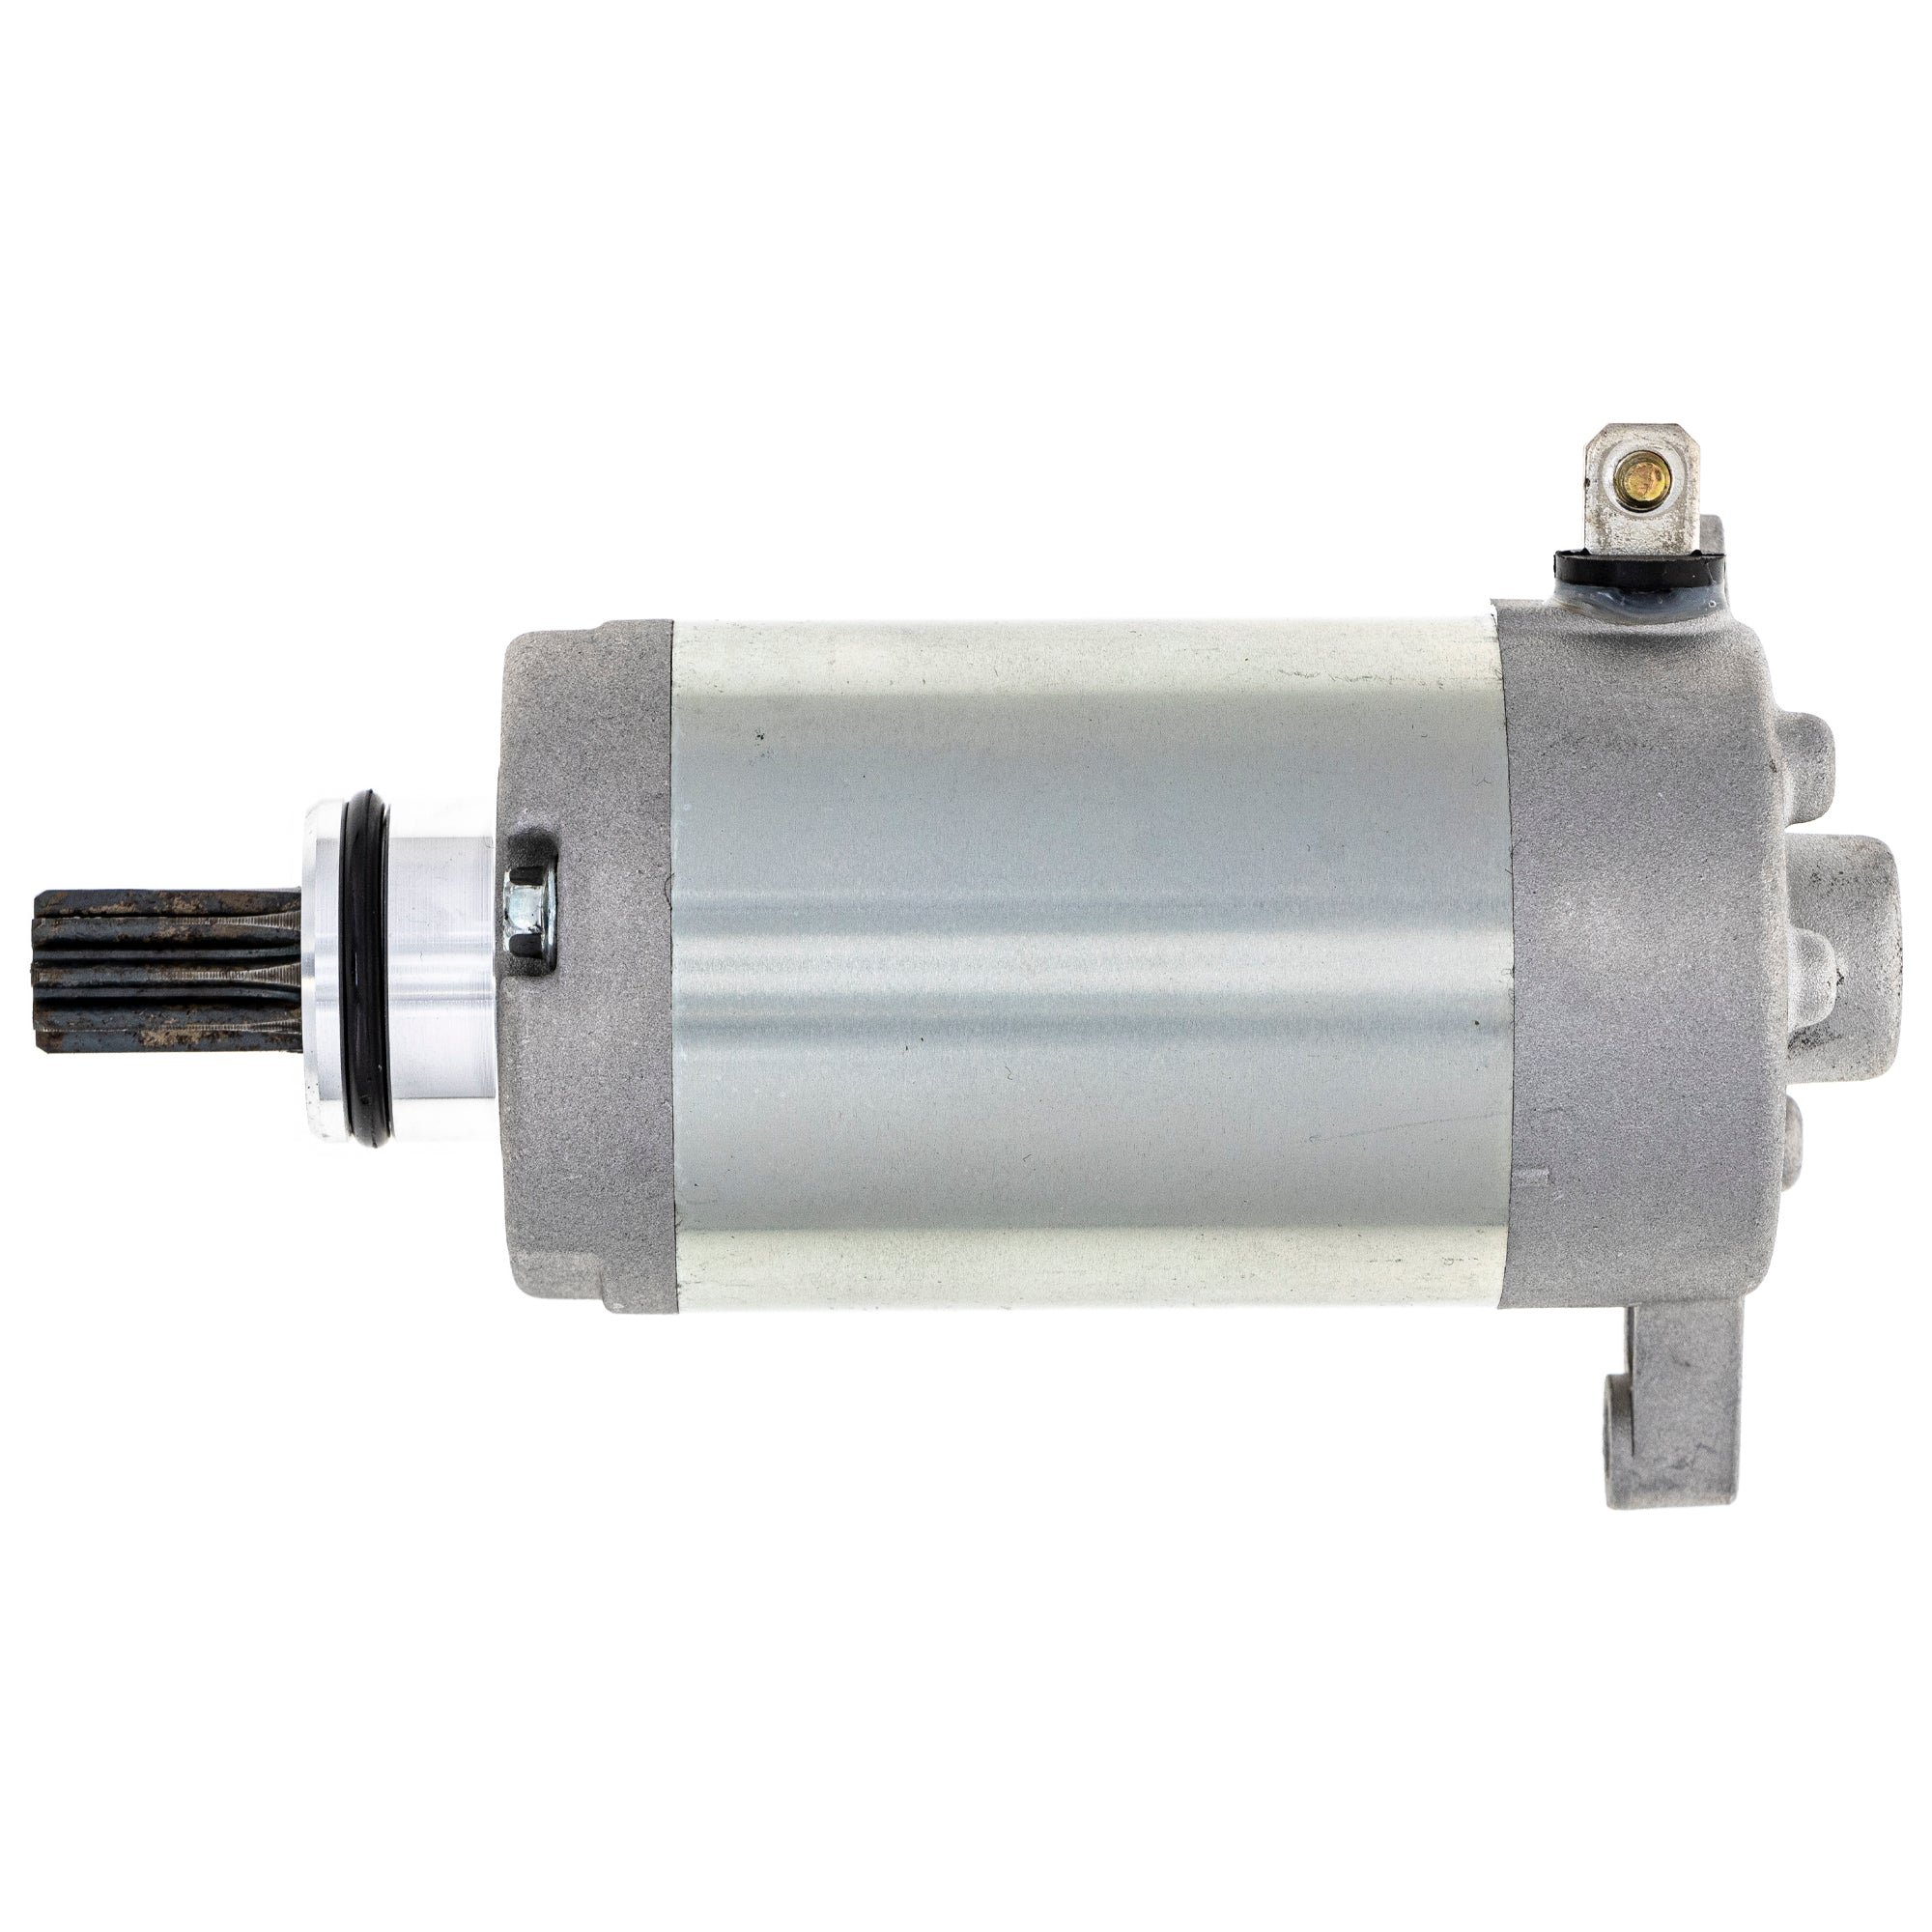 NICHE 519-CSM2400O Starter Motor Assembly for zOTHER TTR125LE TTR125E